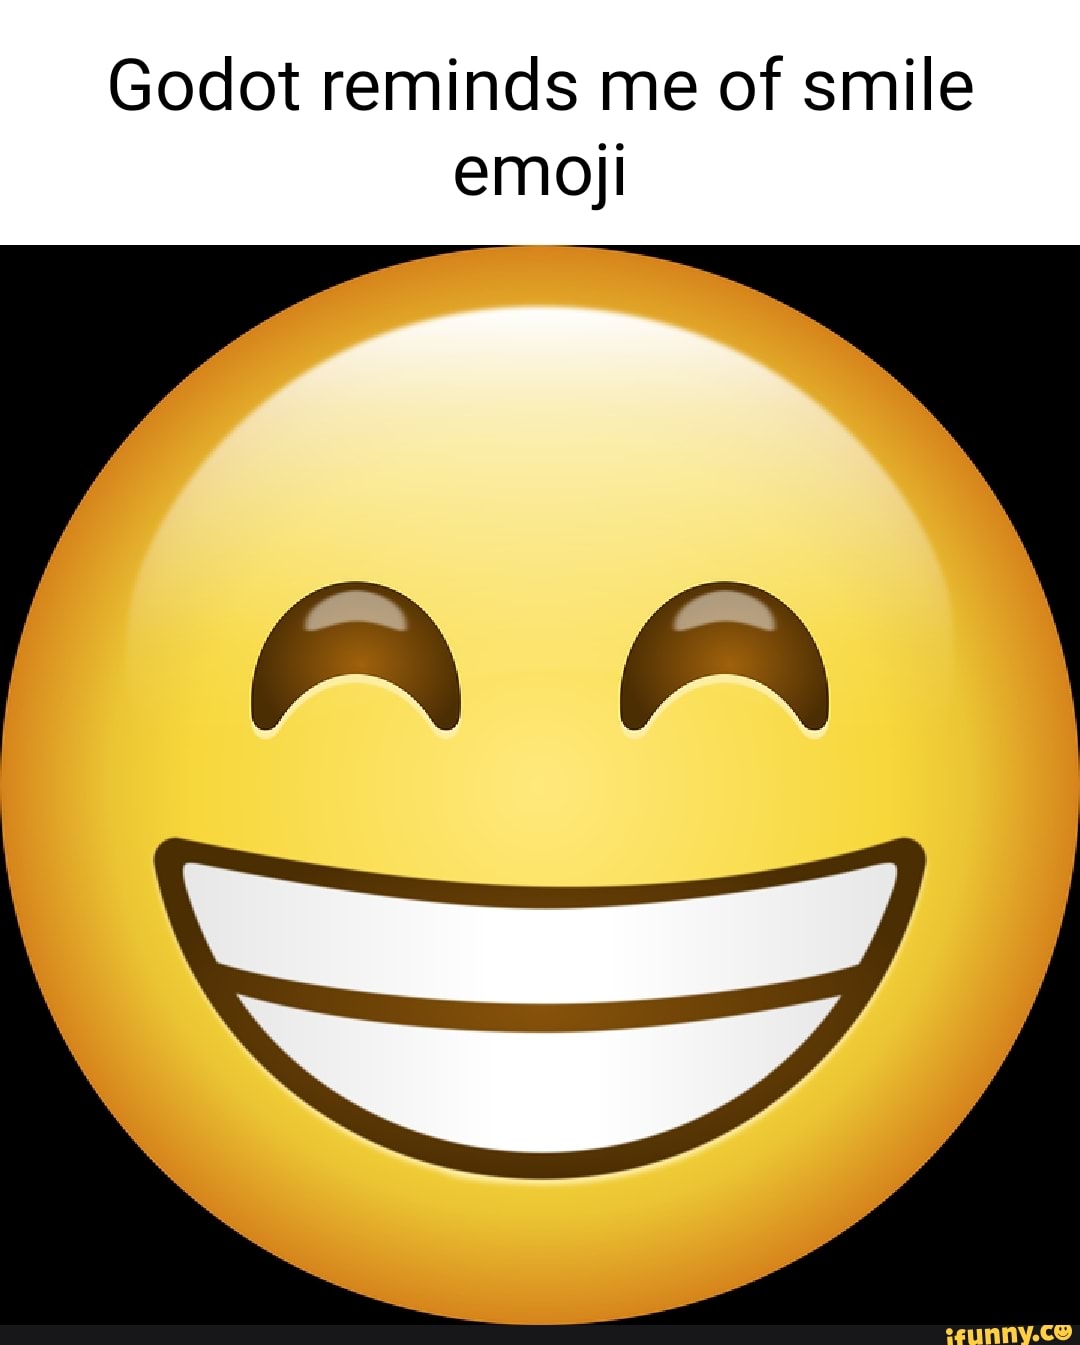 I found an emoji that reminded me of